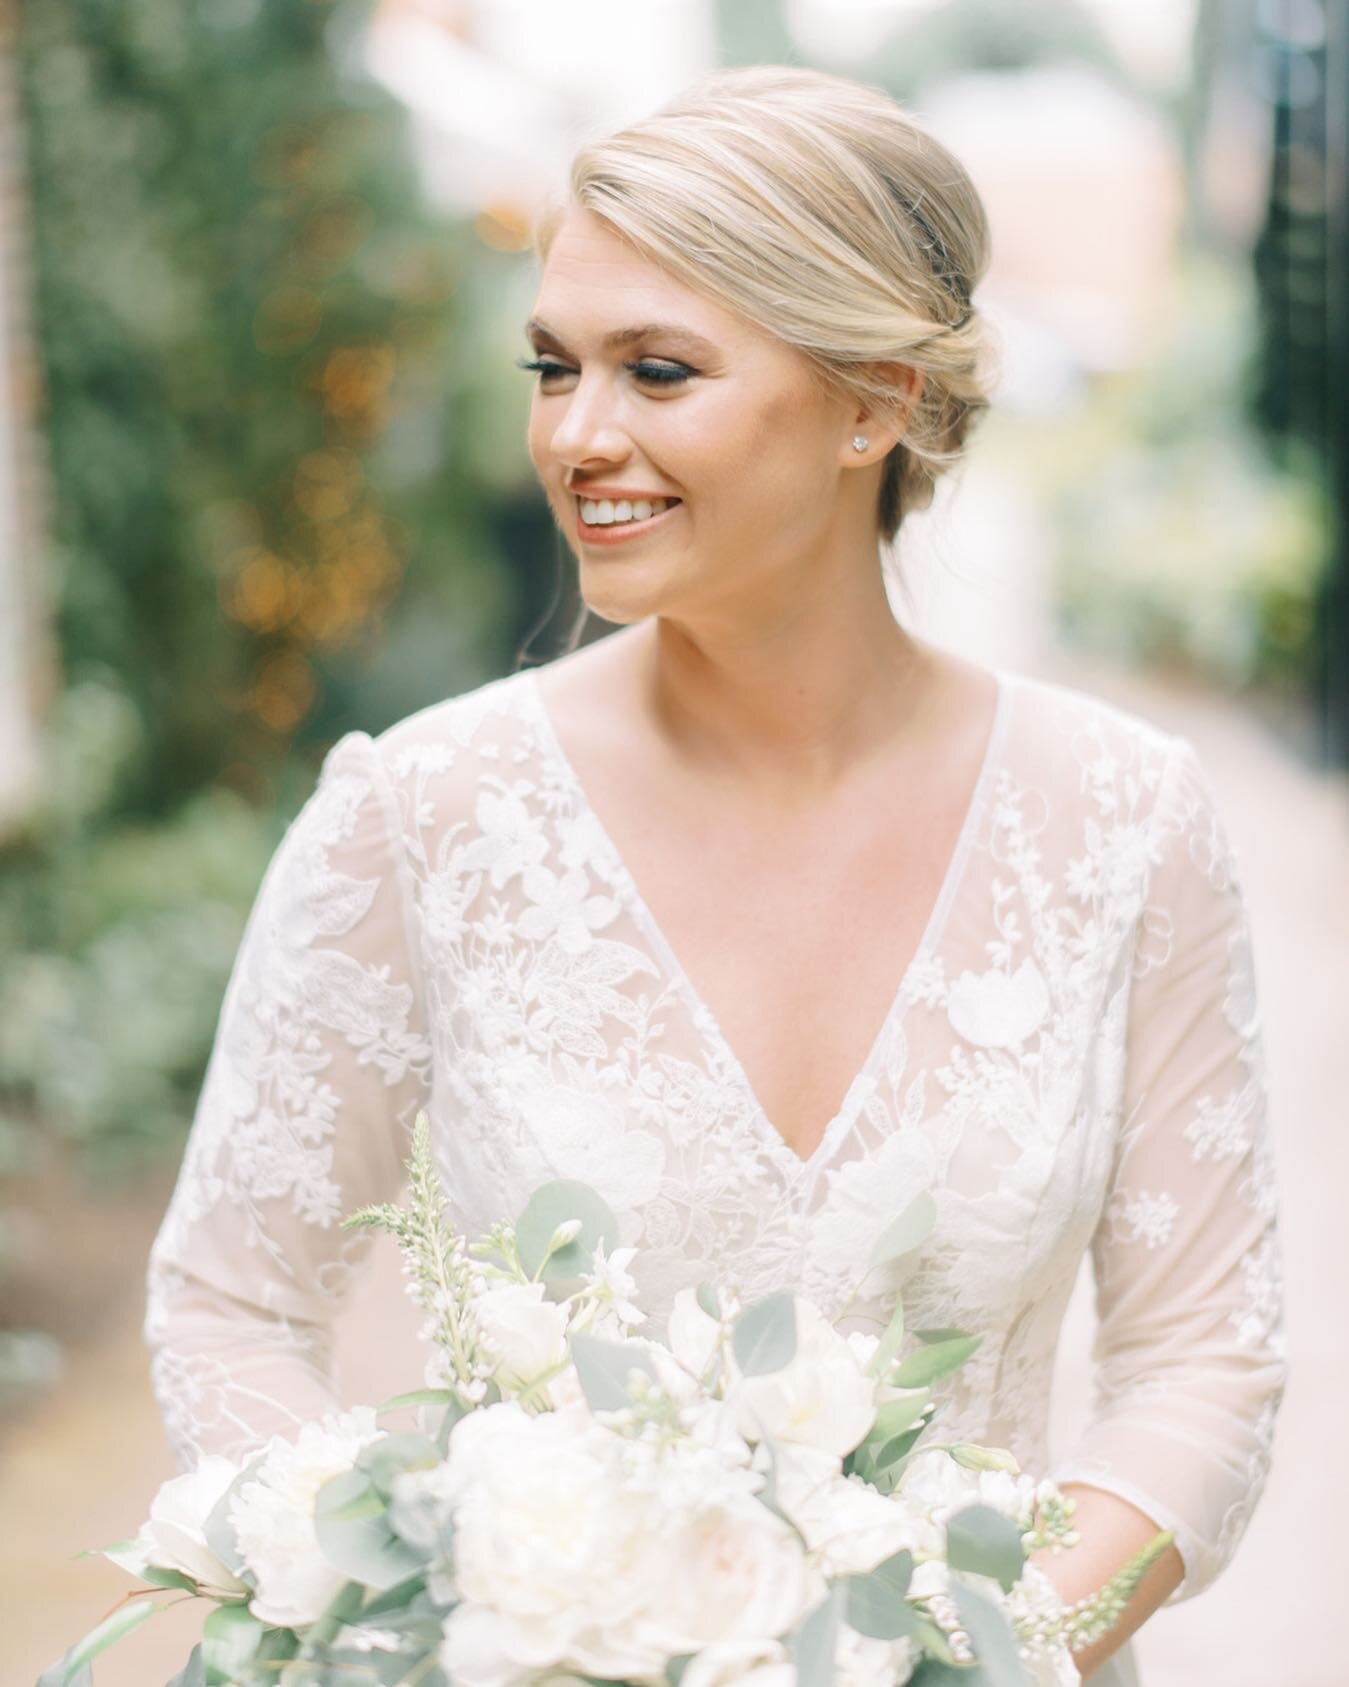 Anna, a true vision on her wedding day!
.
Photography by @alexthorntonphotography
. 
#event #wedding #luxurywedding #justmarried #engaged #brideandgroom #weddingreception #floral #floraldesign #weddingphotography #design #southern #southerncharm #cha